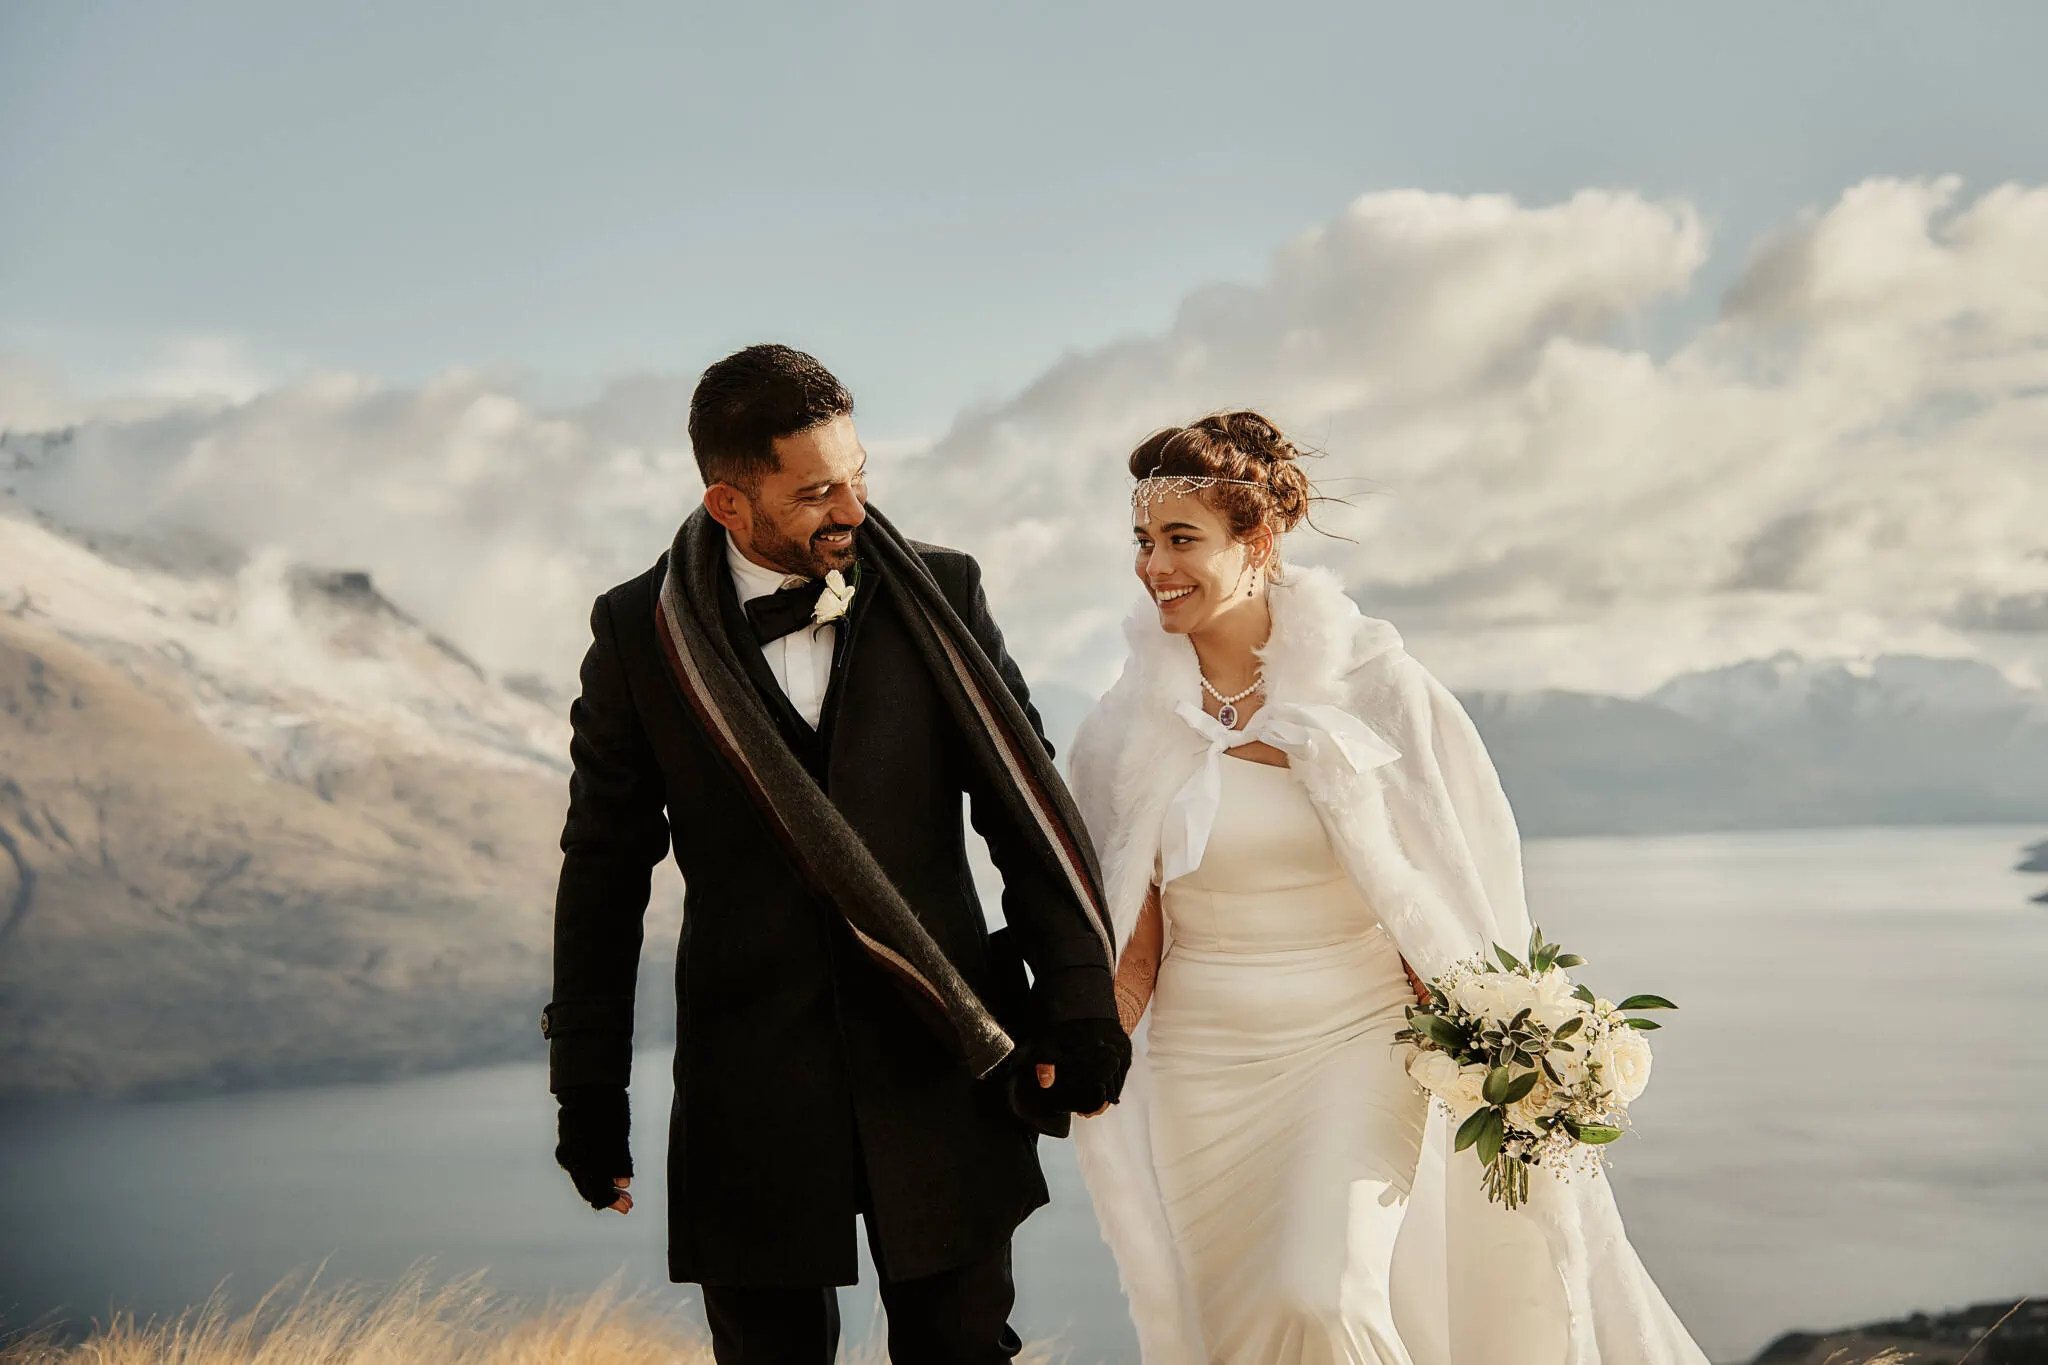 Queenstown New Zealand Elopement Wedding Photographer - Keywords: Queenstown, Islamic Wedding

Description: A Muslim couple named Wasim and Yumn exchanging vows on top of a mountain in Queenstown, New Zealand.